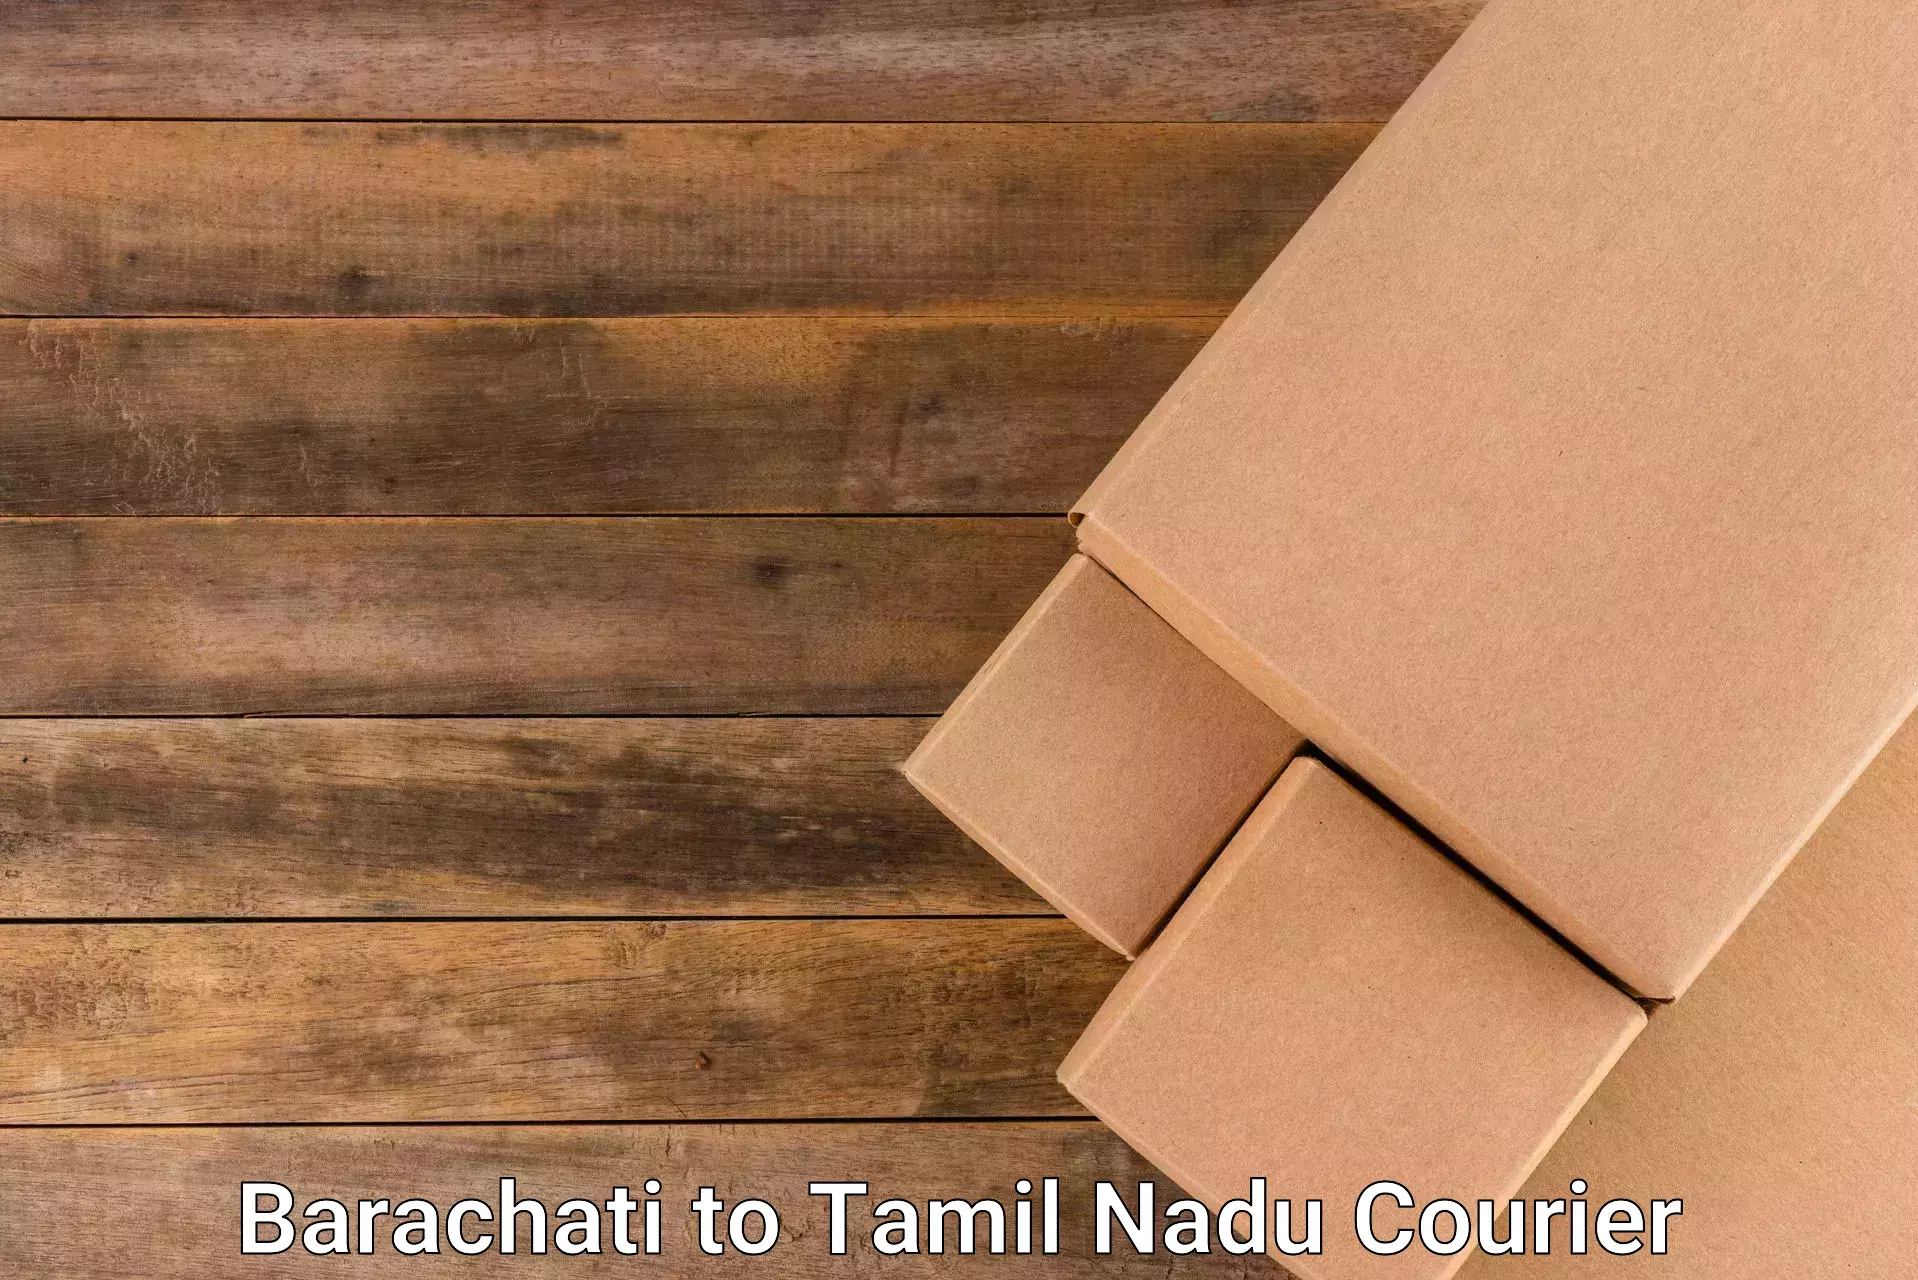 Nationwide delivery network Barachati to Mettala